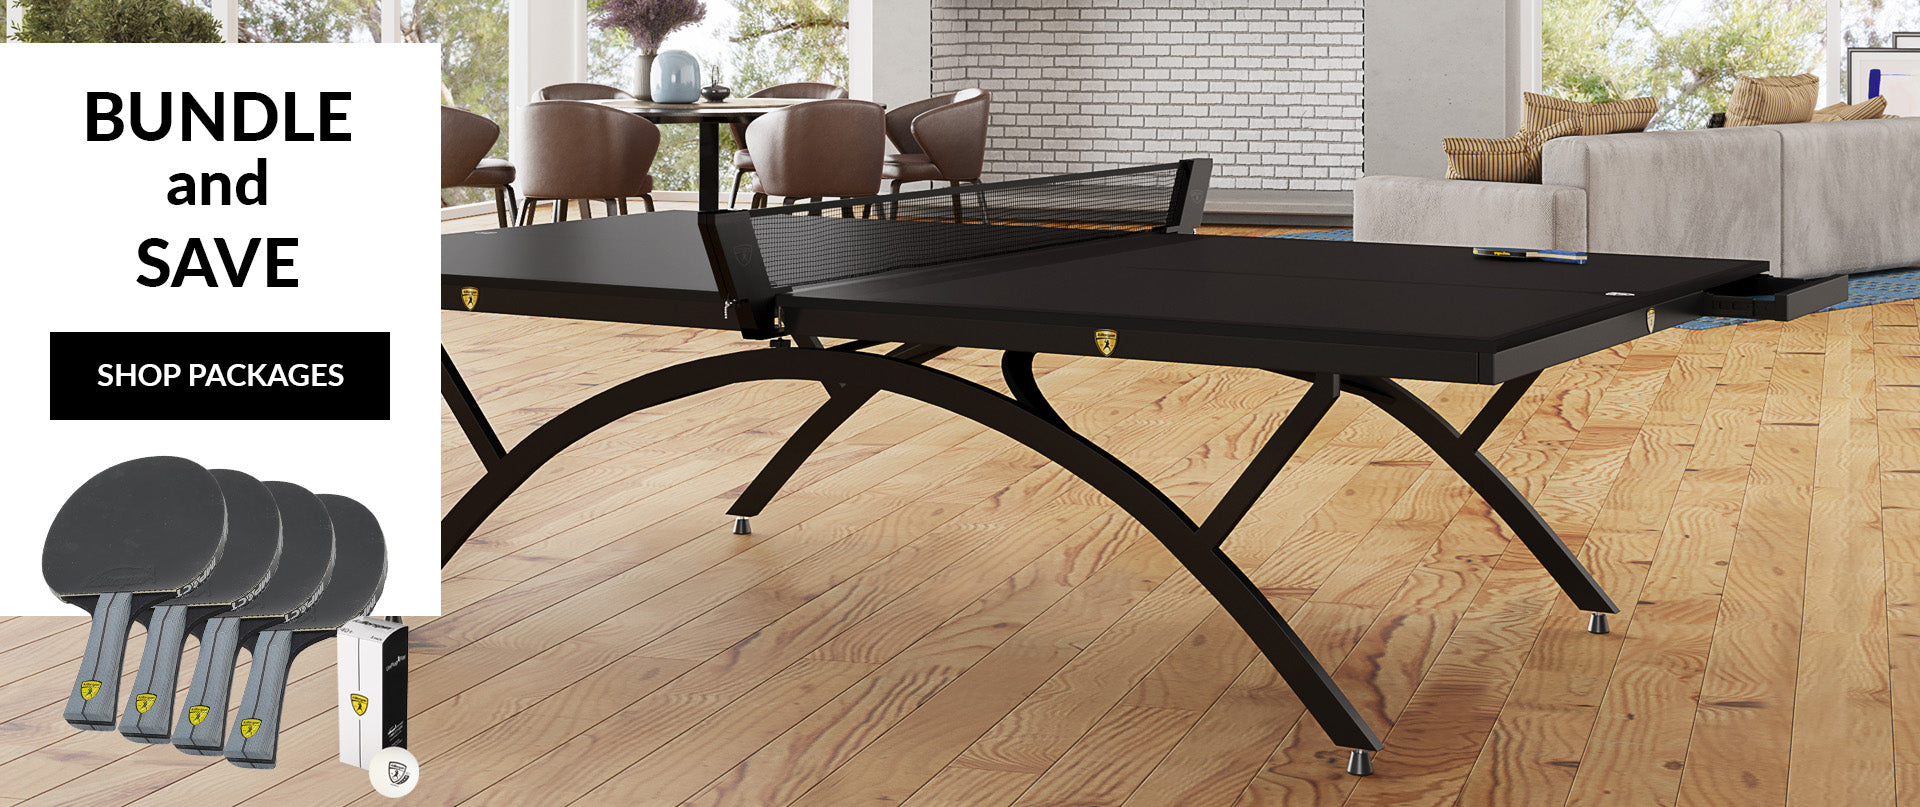 Killerspin Ping Pong Table and Table Tennis Equipment